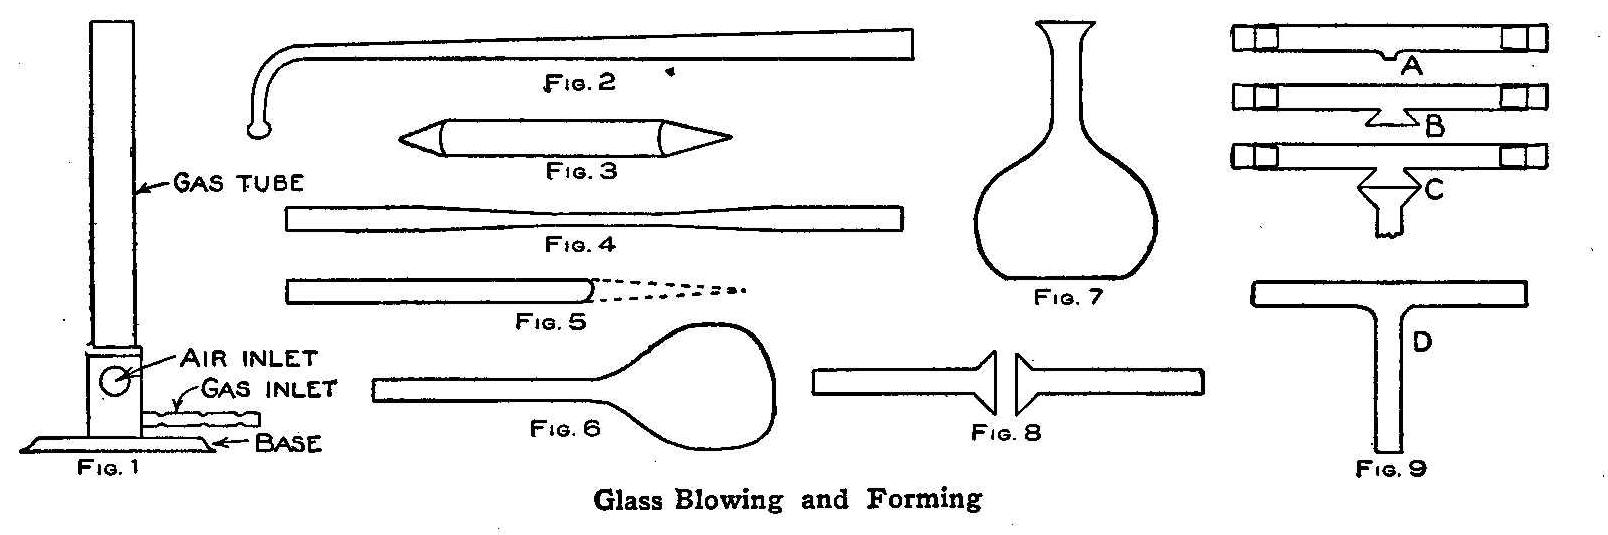 Glass Blowing and Forming 